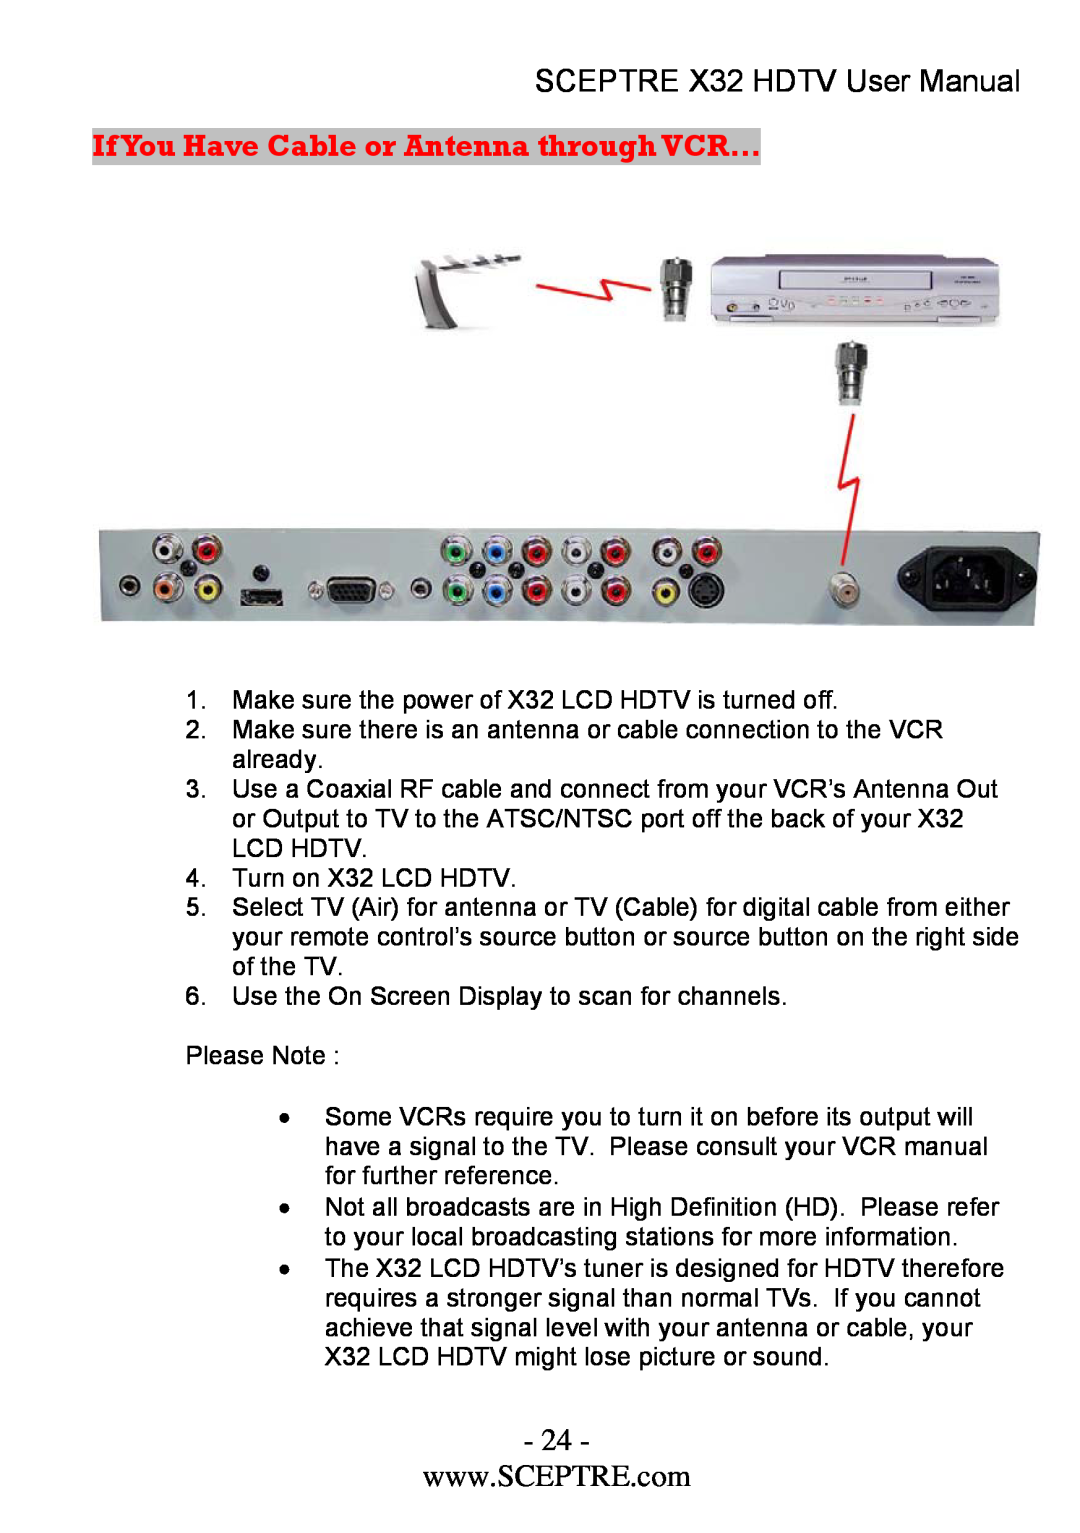 Sceptre Technologies x32 user manual If You Have Cable or Antenna through VCR…, SCEPTRE X32 HDTV User Manual 